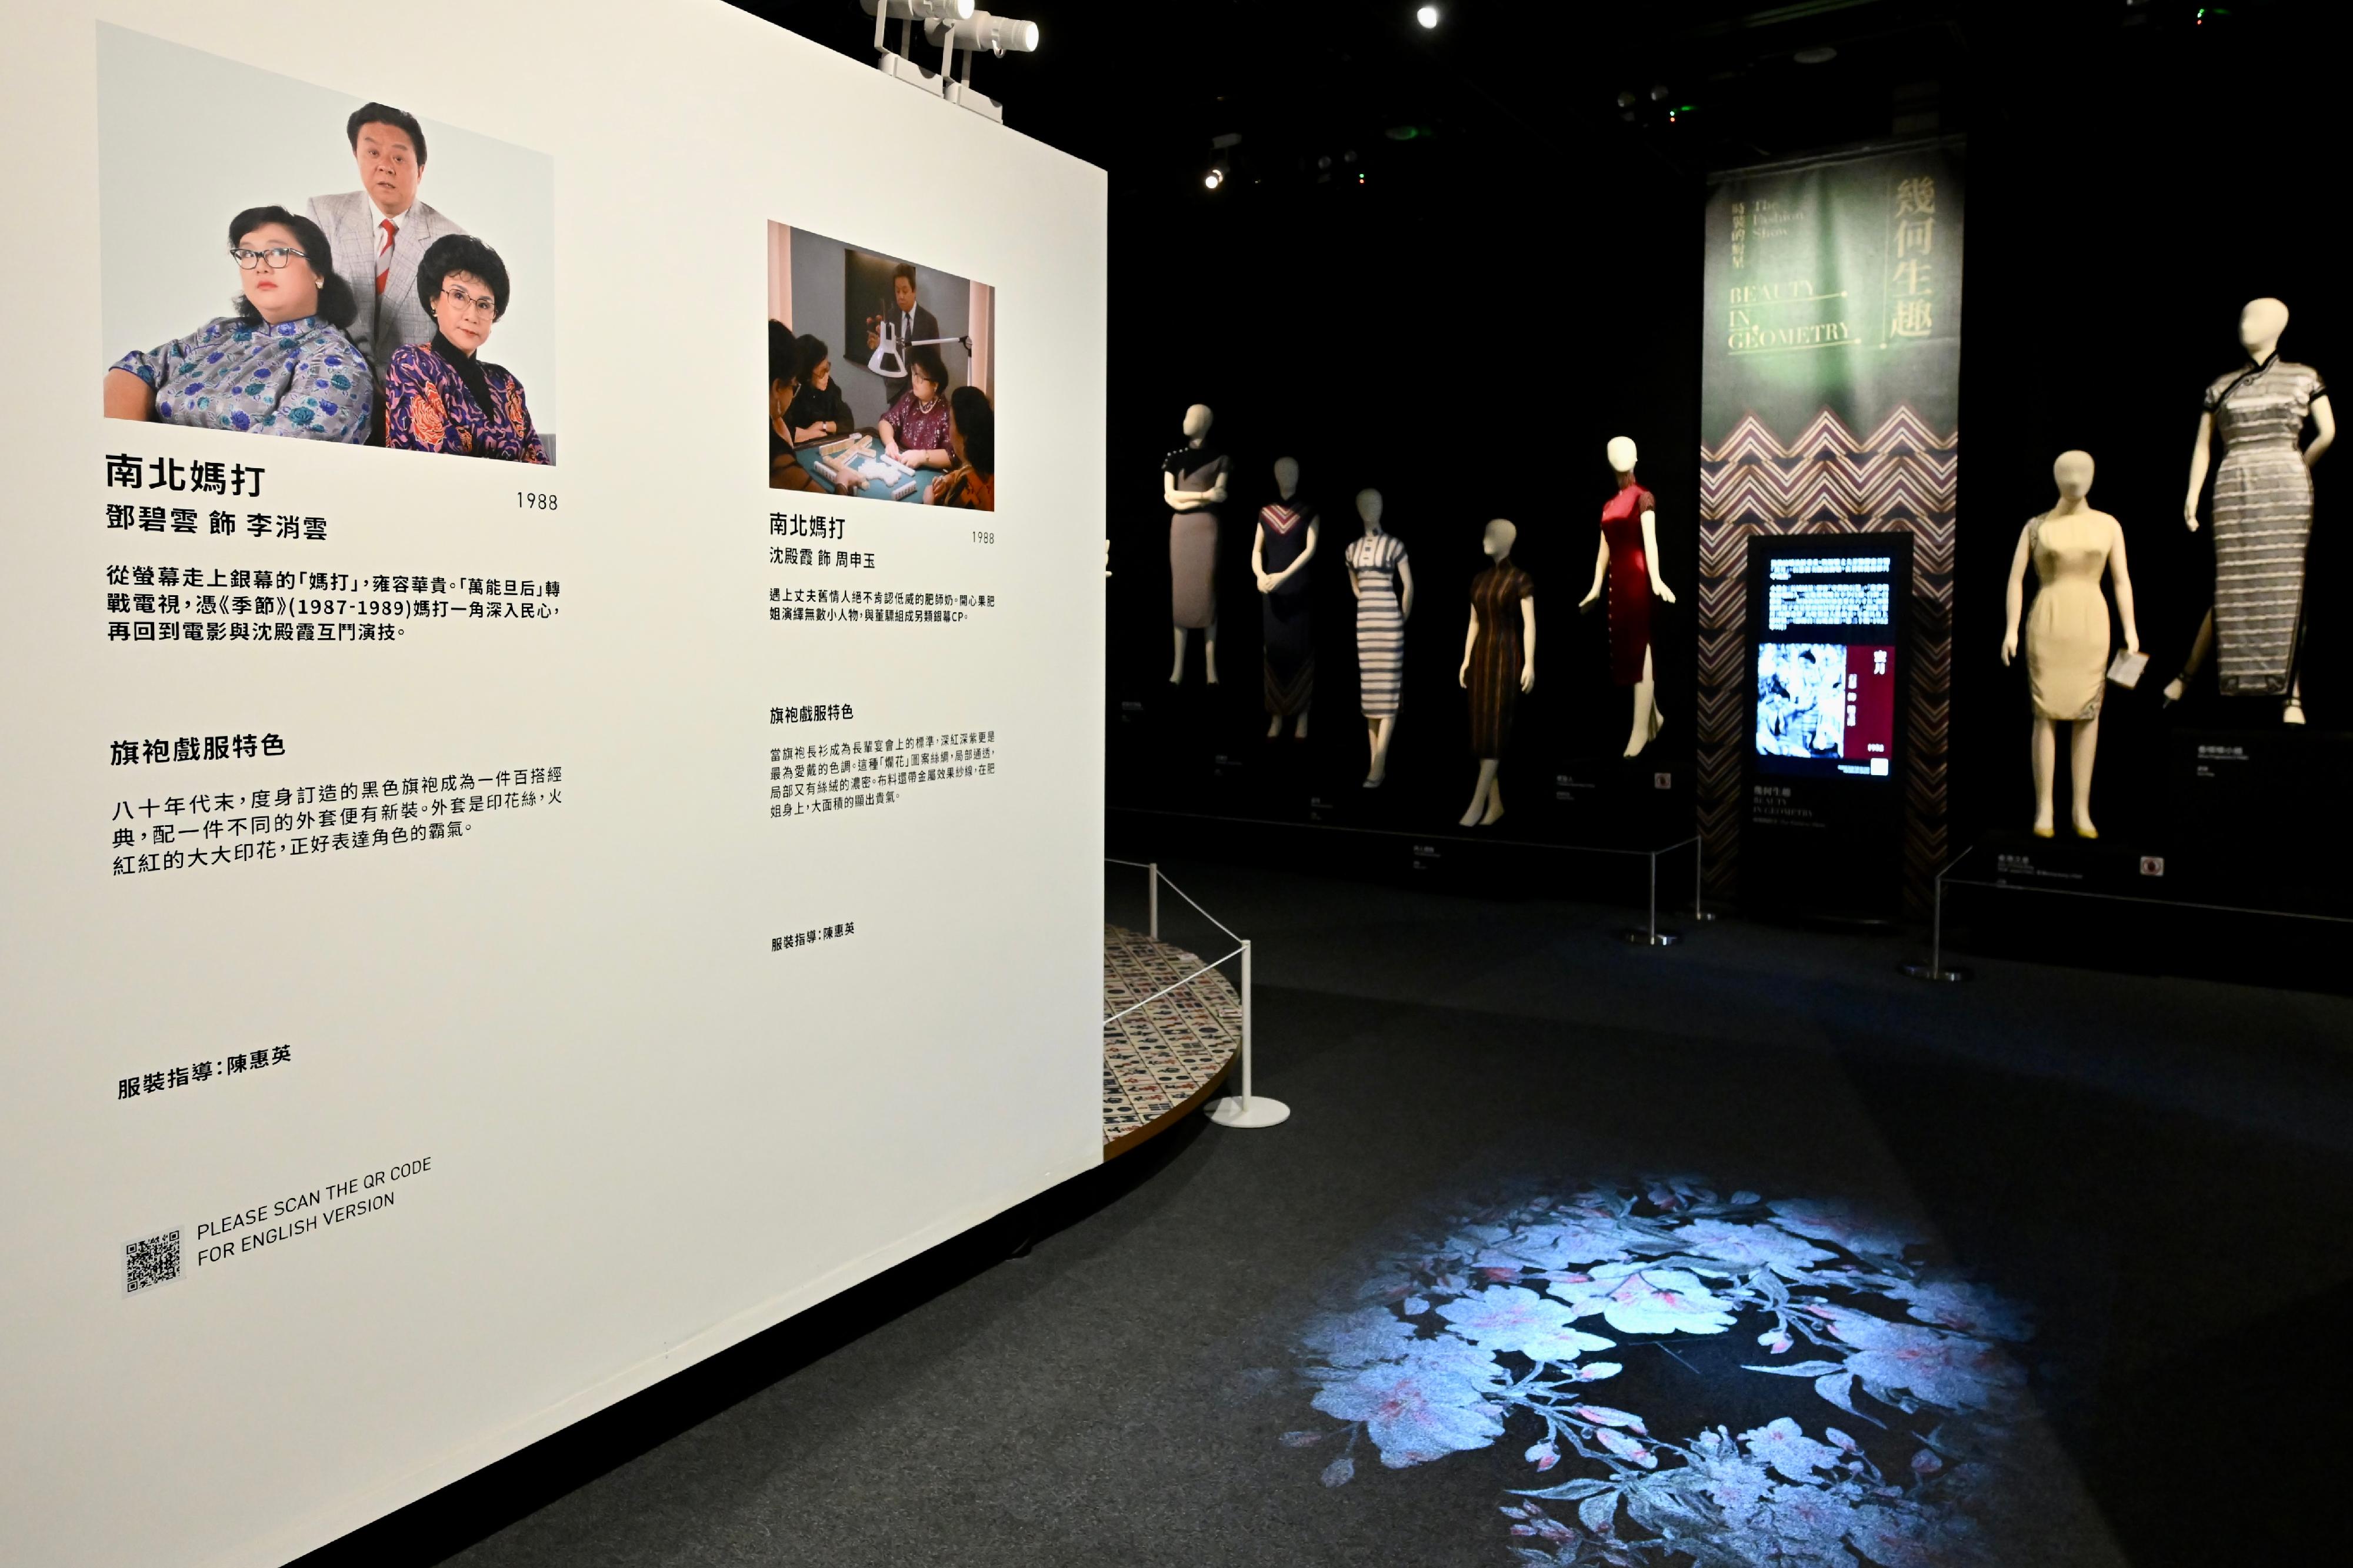 The Hong Kong Film Archive (HKFA) of the Leisure and Cultural Services Department is staging the "Cinderella and Her Qipao" exhibition at the Exhibition Hall of the HKFA today (November 3) until May 5 next year, displaying 31 pieces of qipao costume in films from the 1950s to the 1990s to showcase the fashion trends in films of different eras. 